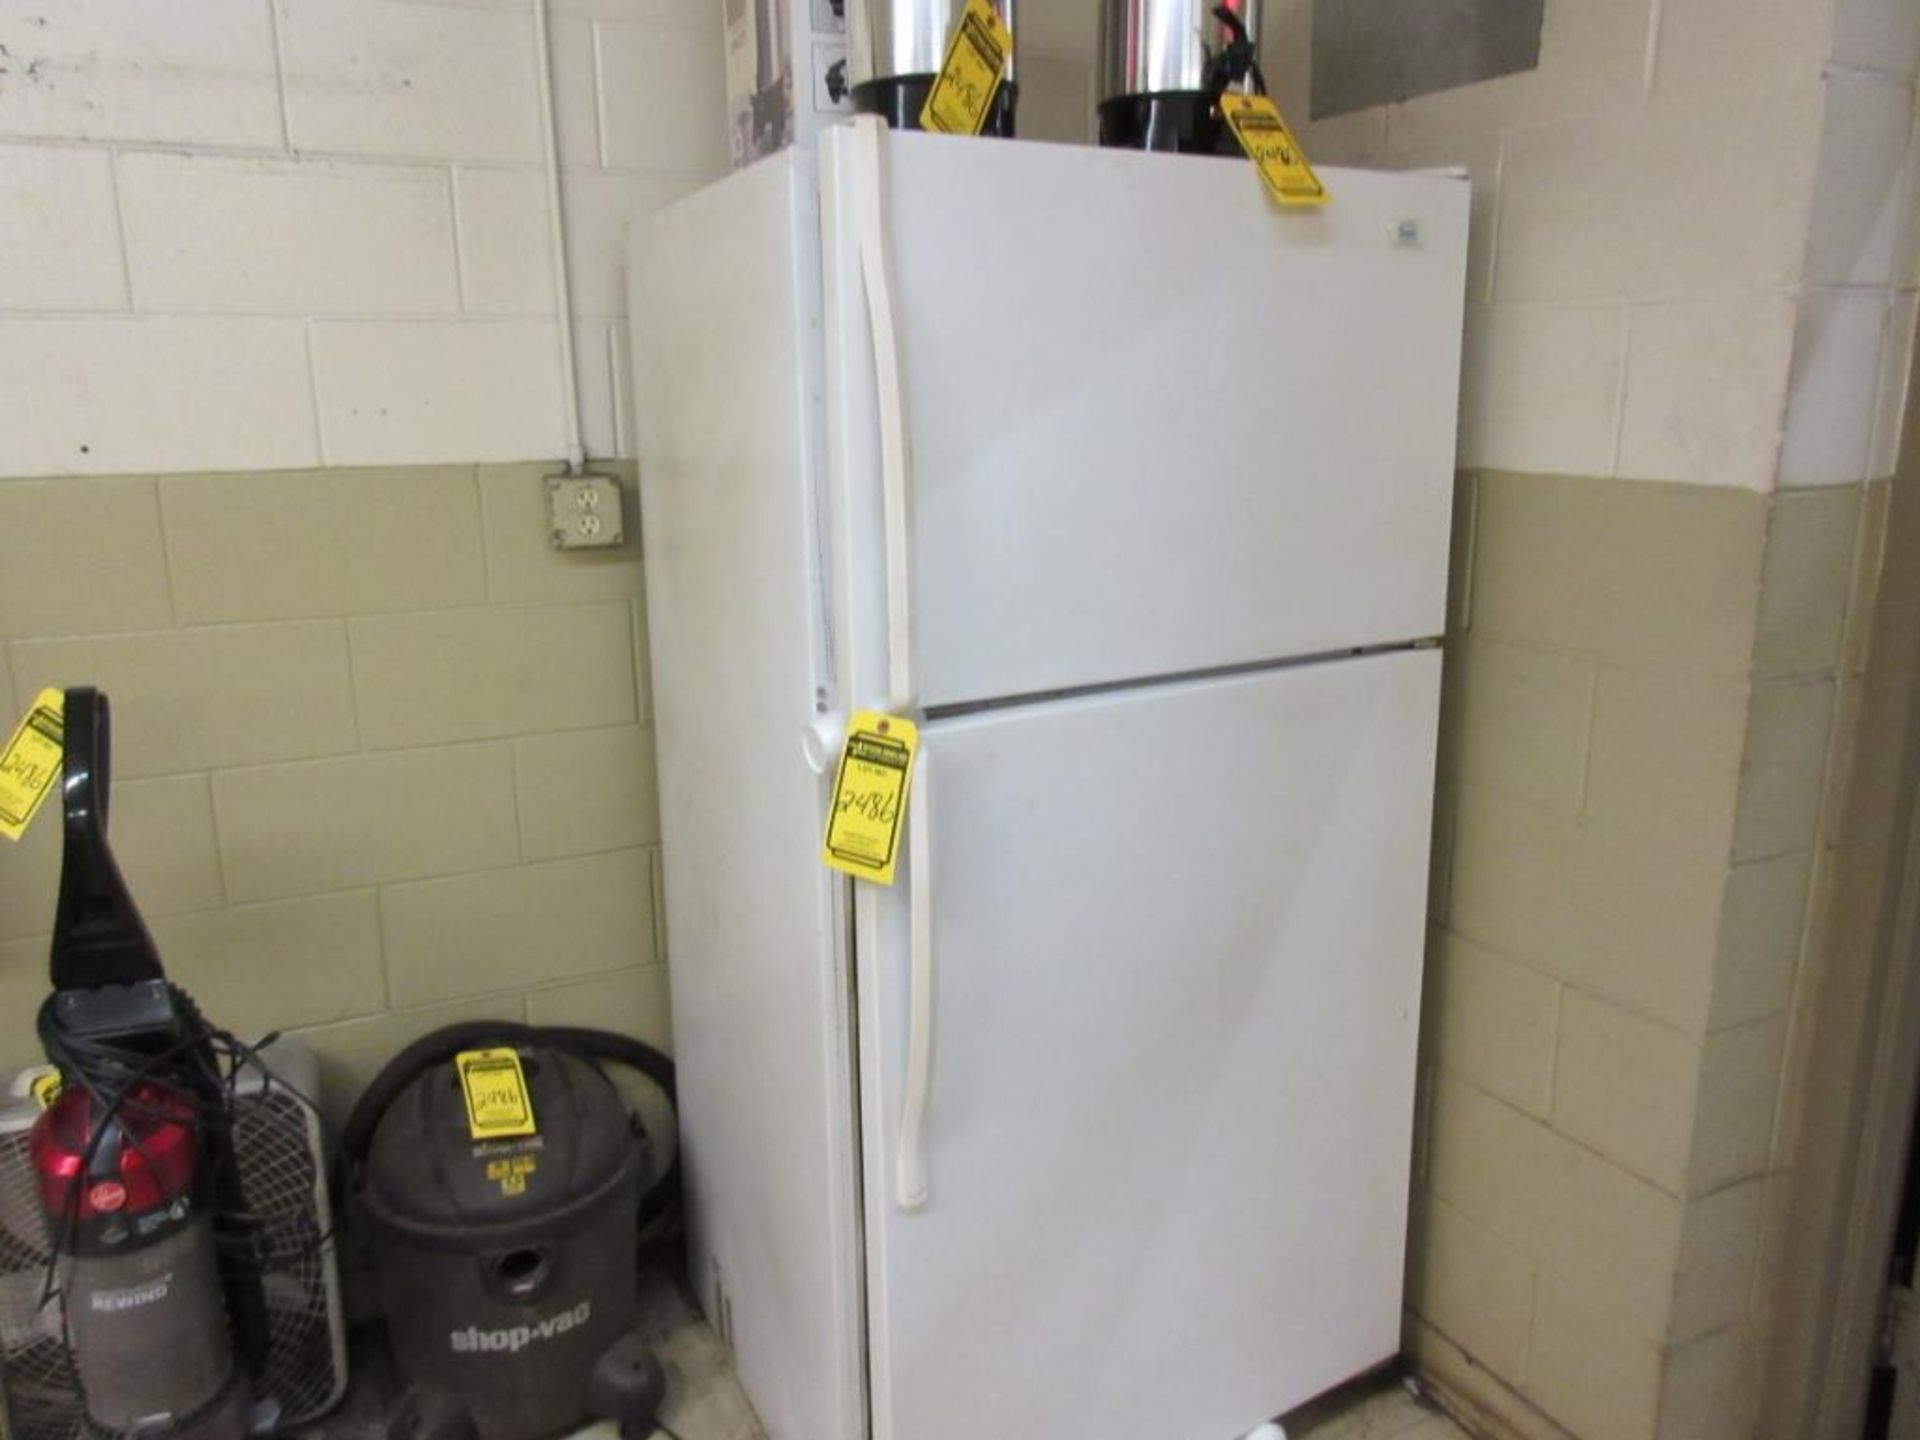 REFRIGERATOR, ALUMINUM LADDER, SHOP VAC, VACUUM CLEANER, COFFEE POTS, MICROWAVES OVENS - Image 2 of 4